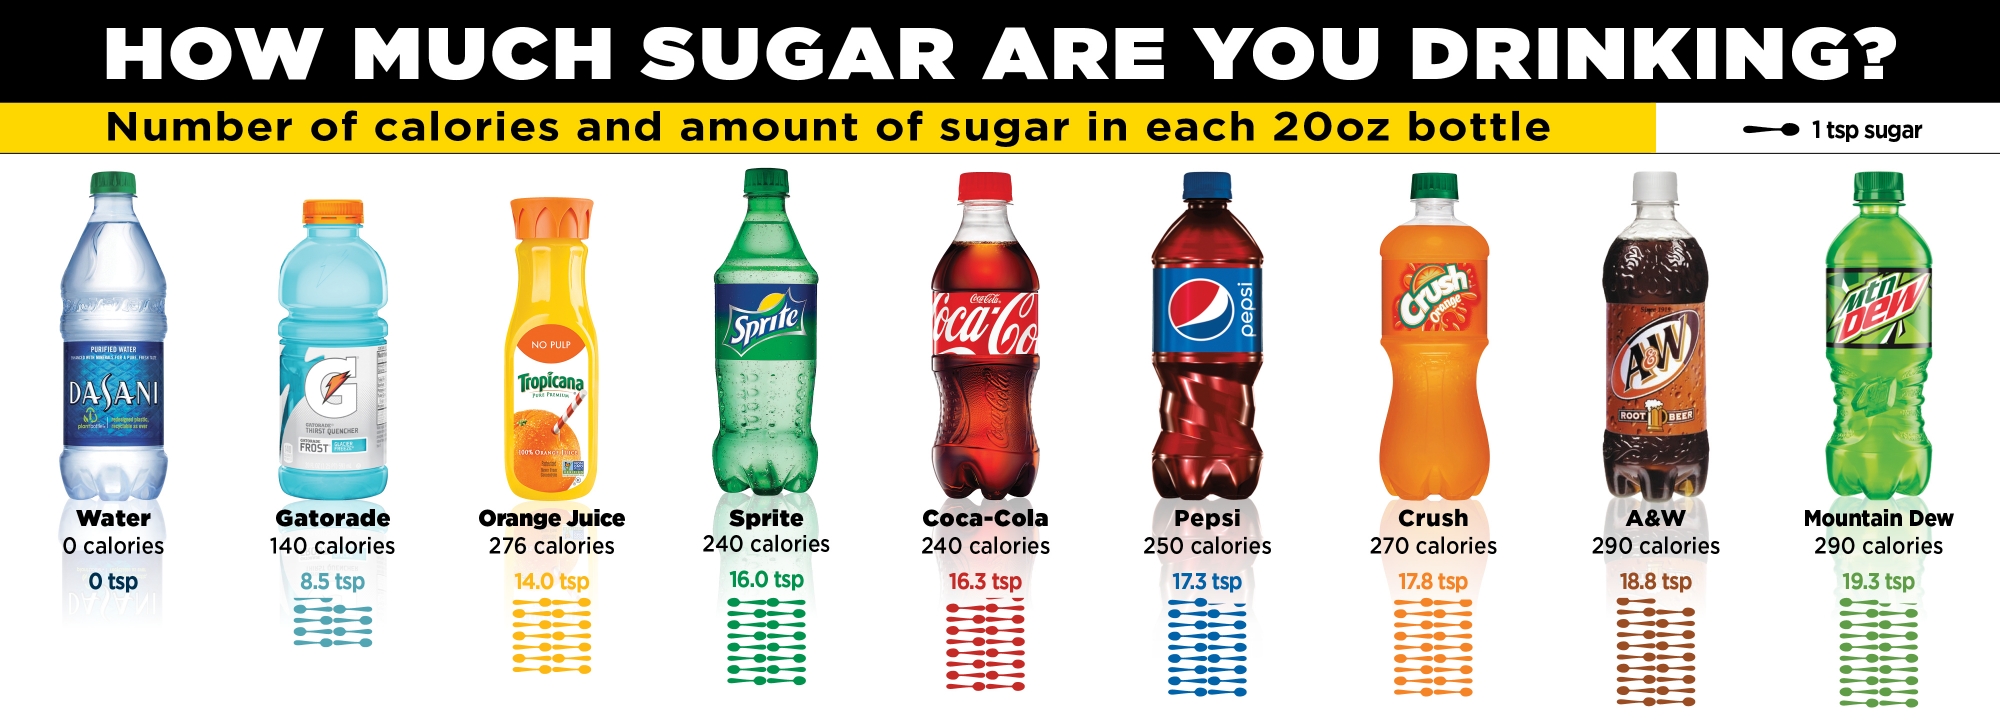 How much sugar are you drinking?